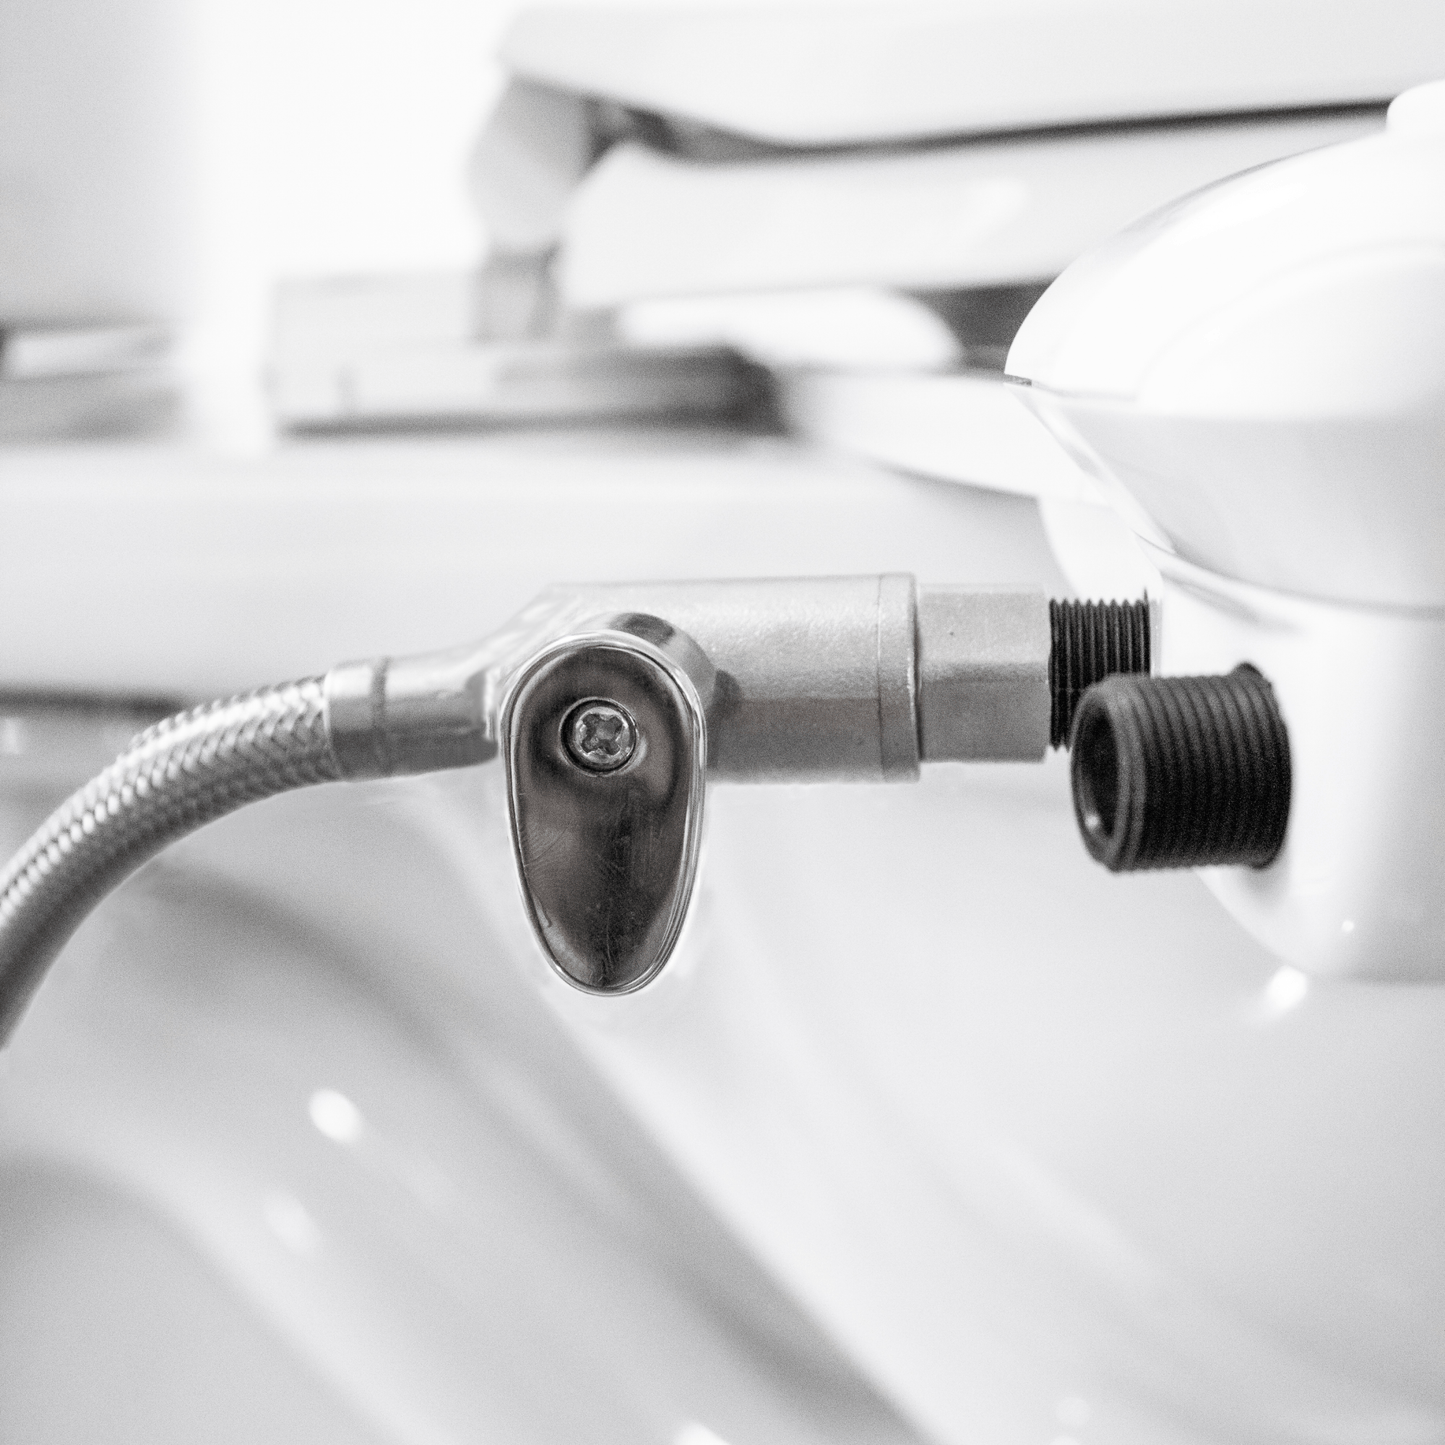 Cold Water Shut-Off Hose, with lever attached to the bidet body, in the off-position